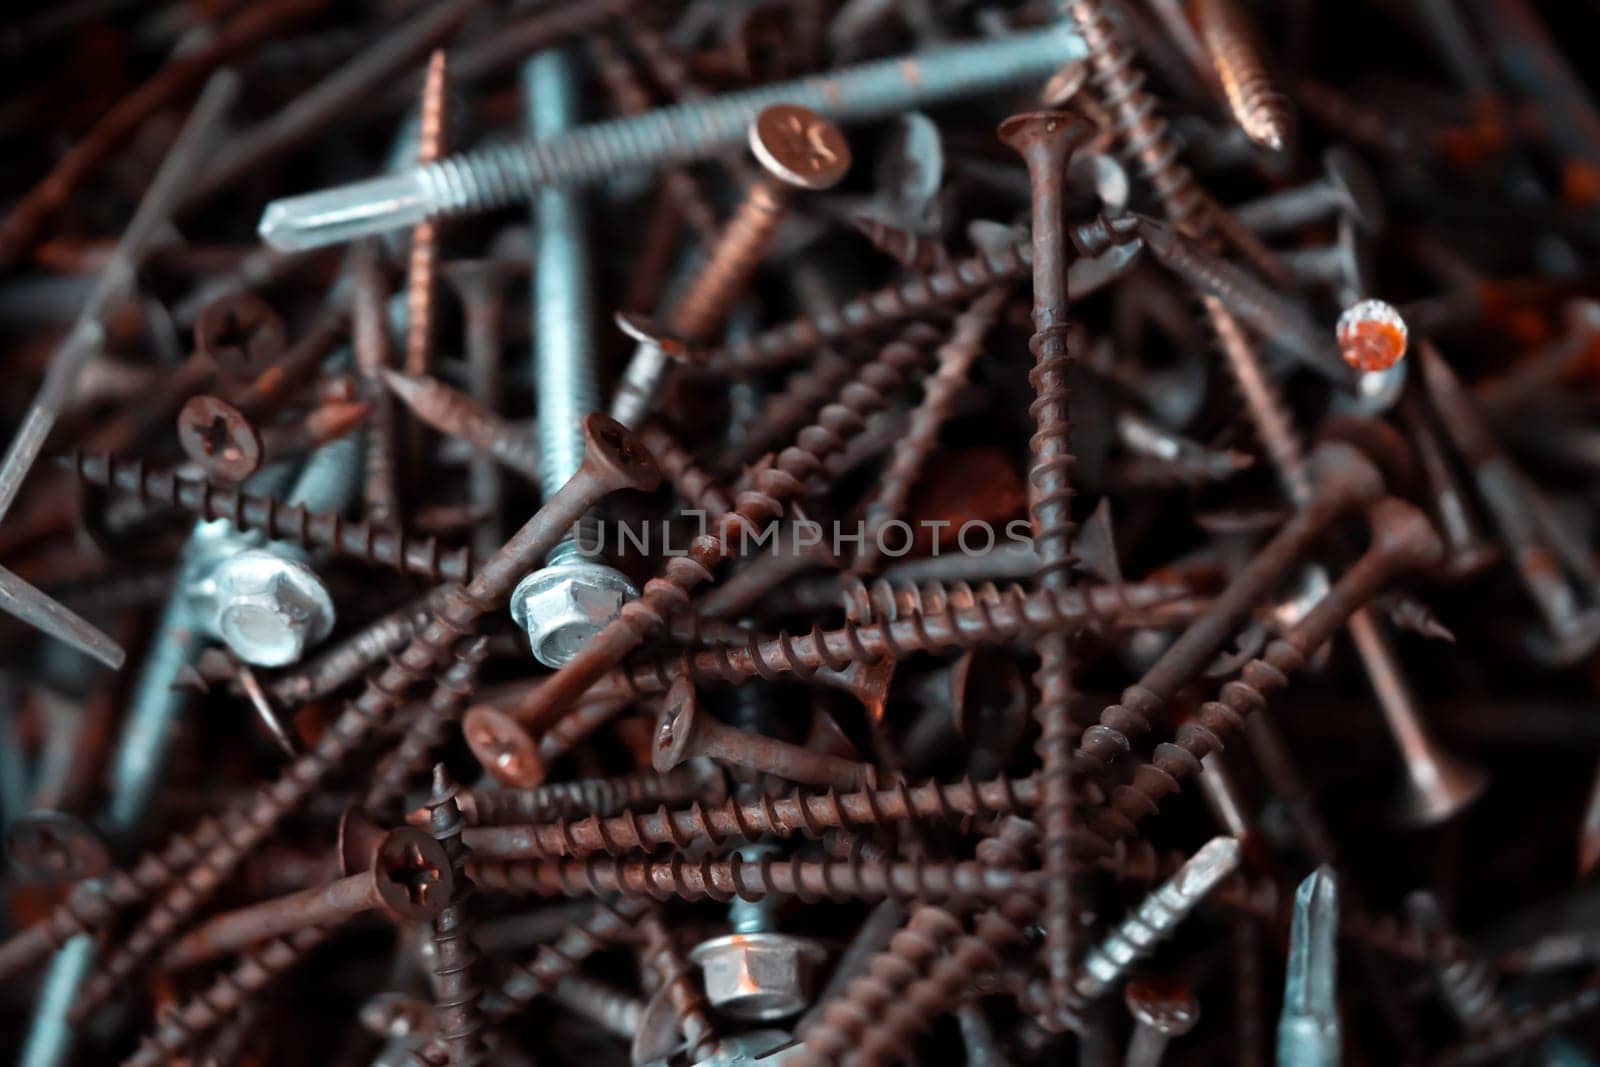 Screws and nails, tools for repair work, connection of structures, construction and handicraft closeup view on the dark background.